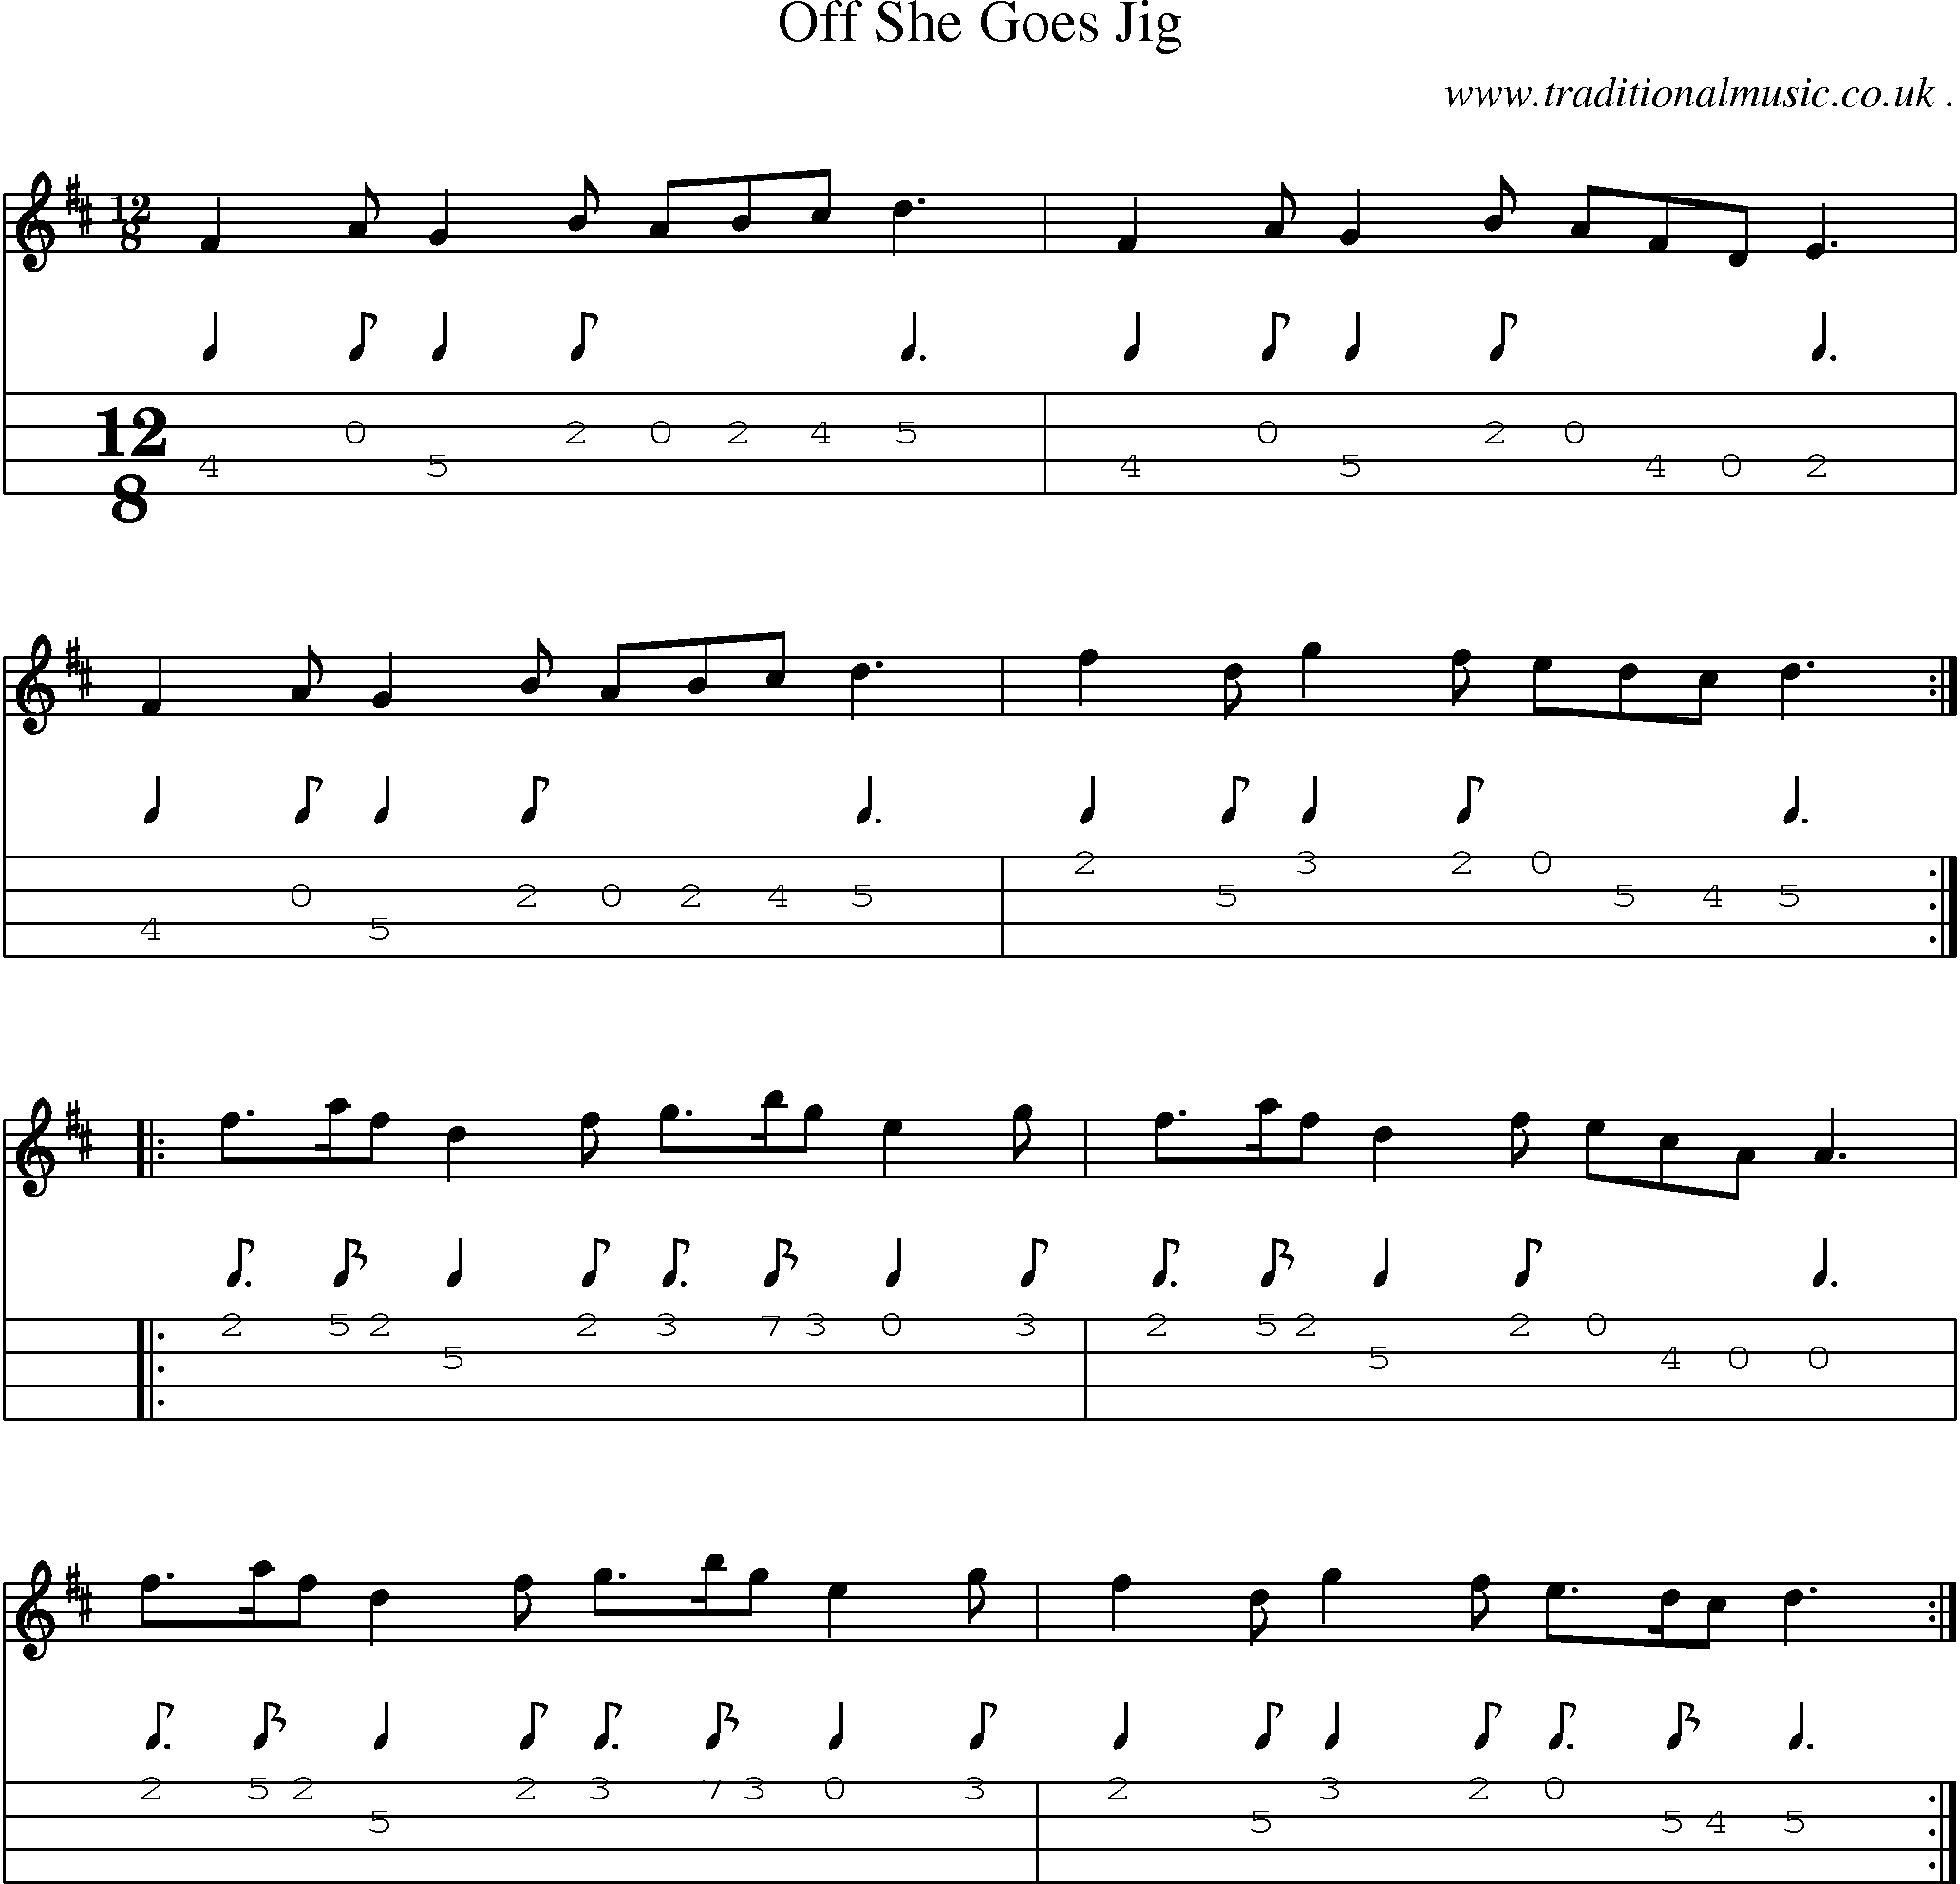 Sheet-Music and Mandolin Tabs for Off She Goes Jig